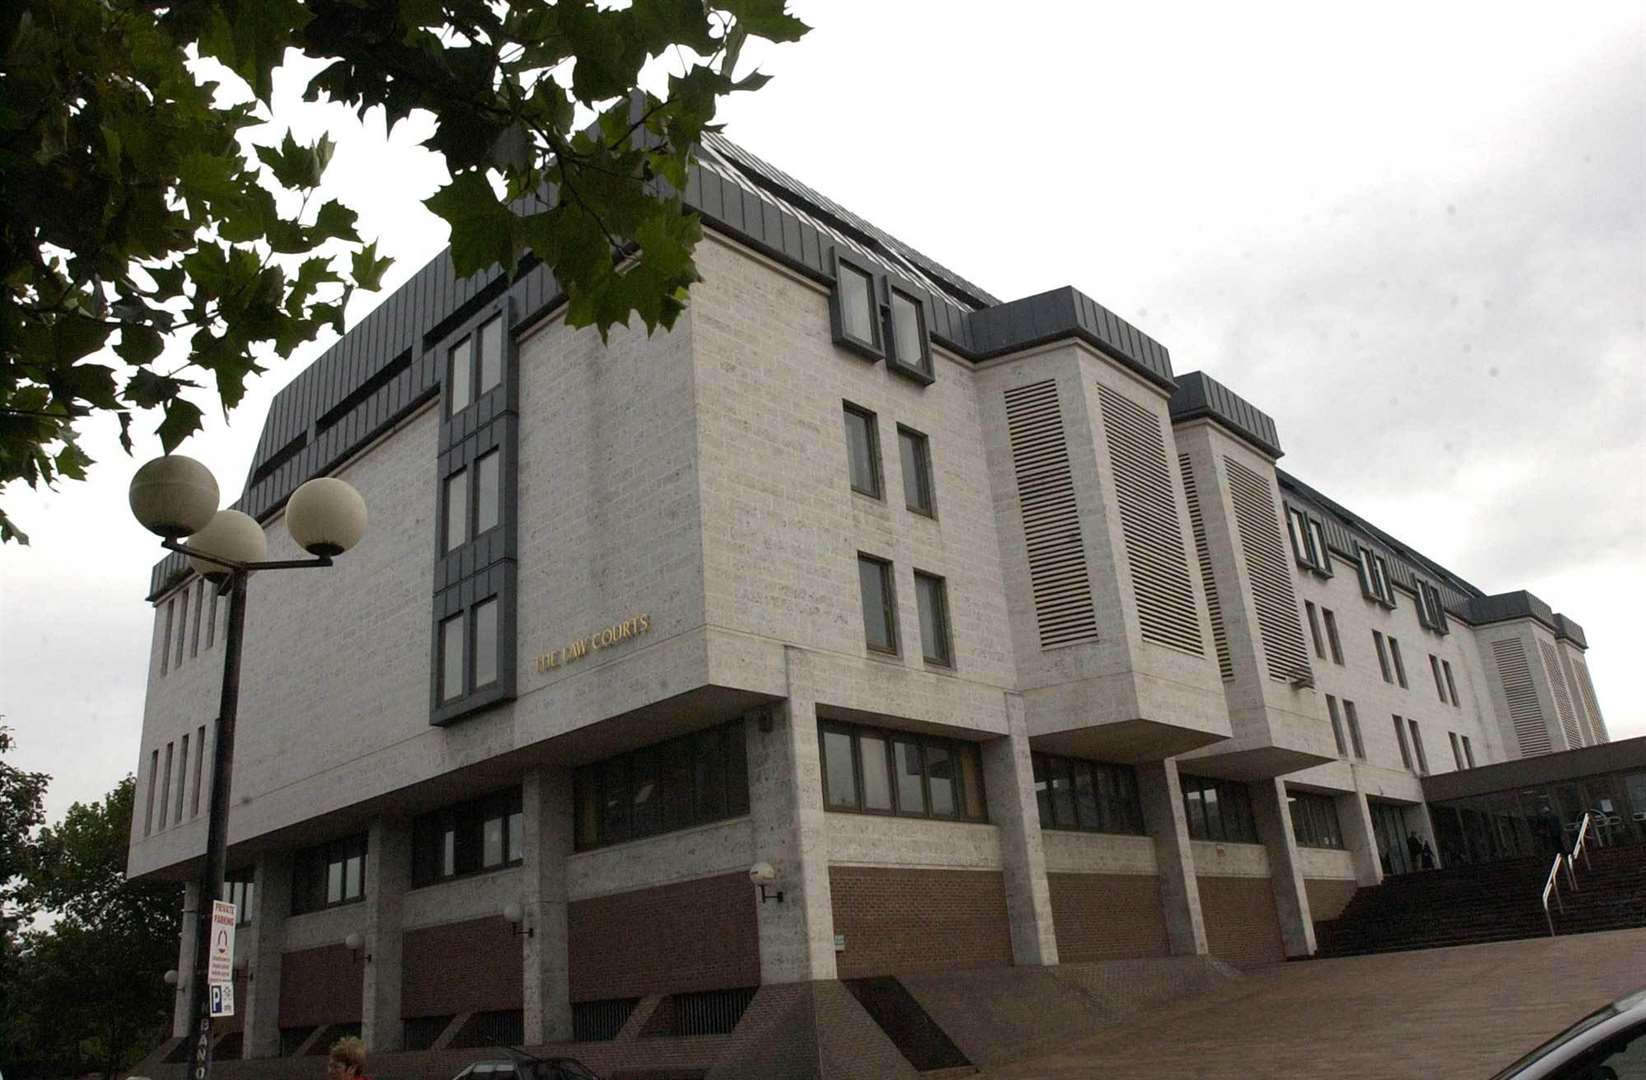 Hearings were adjourned at Maidstone Crown Court